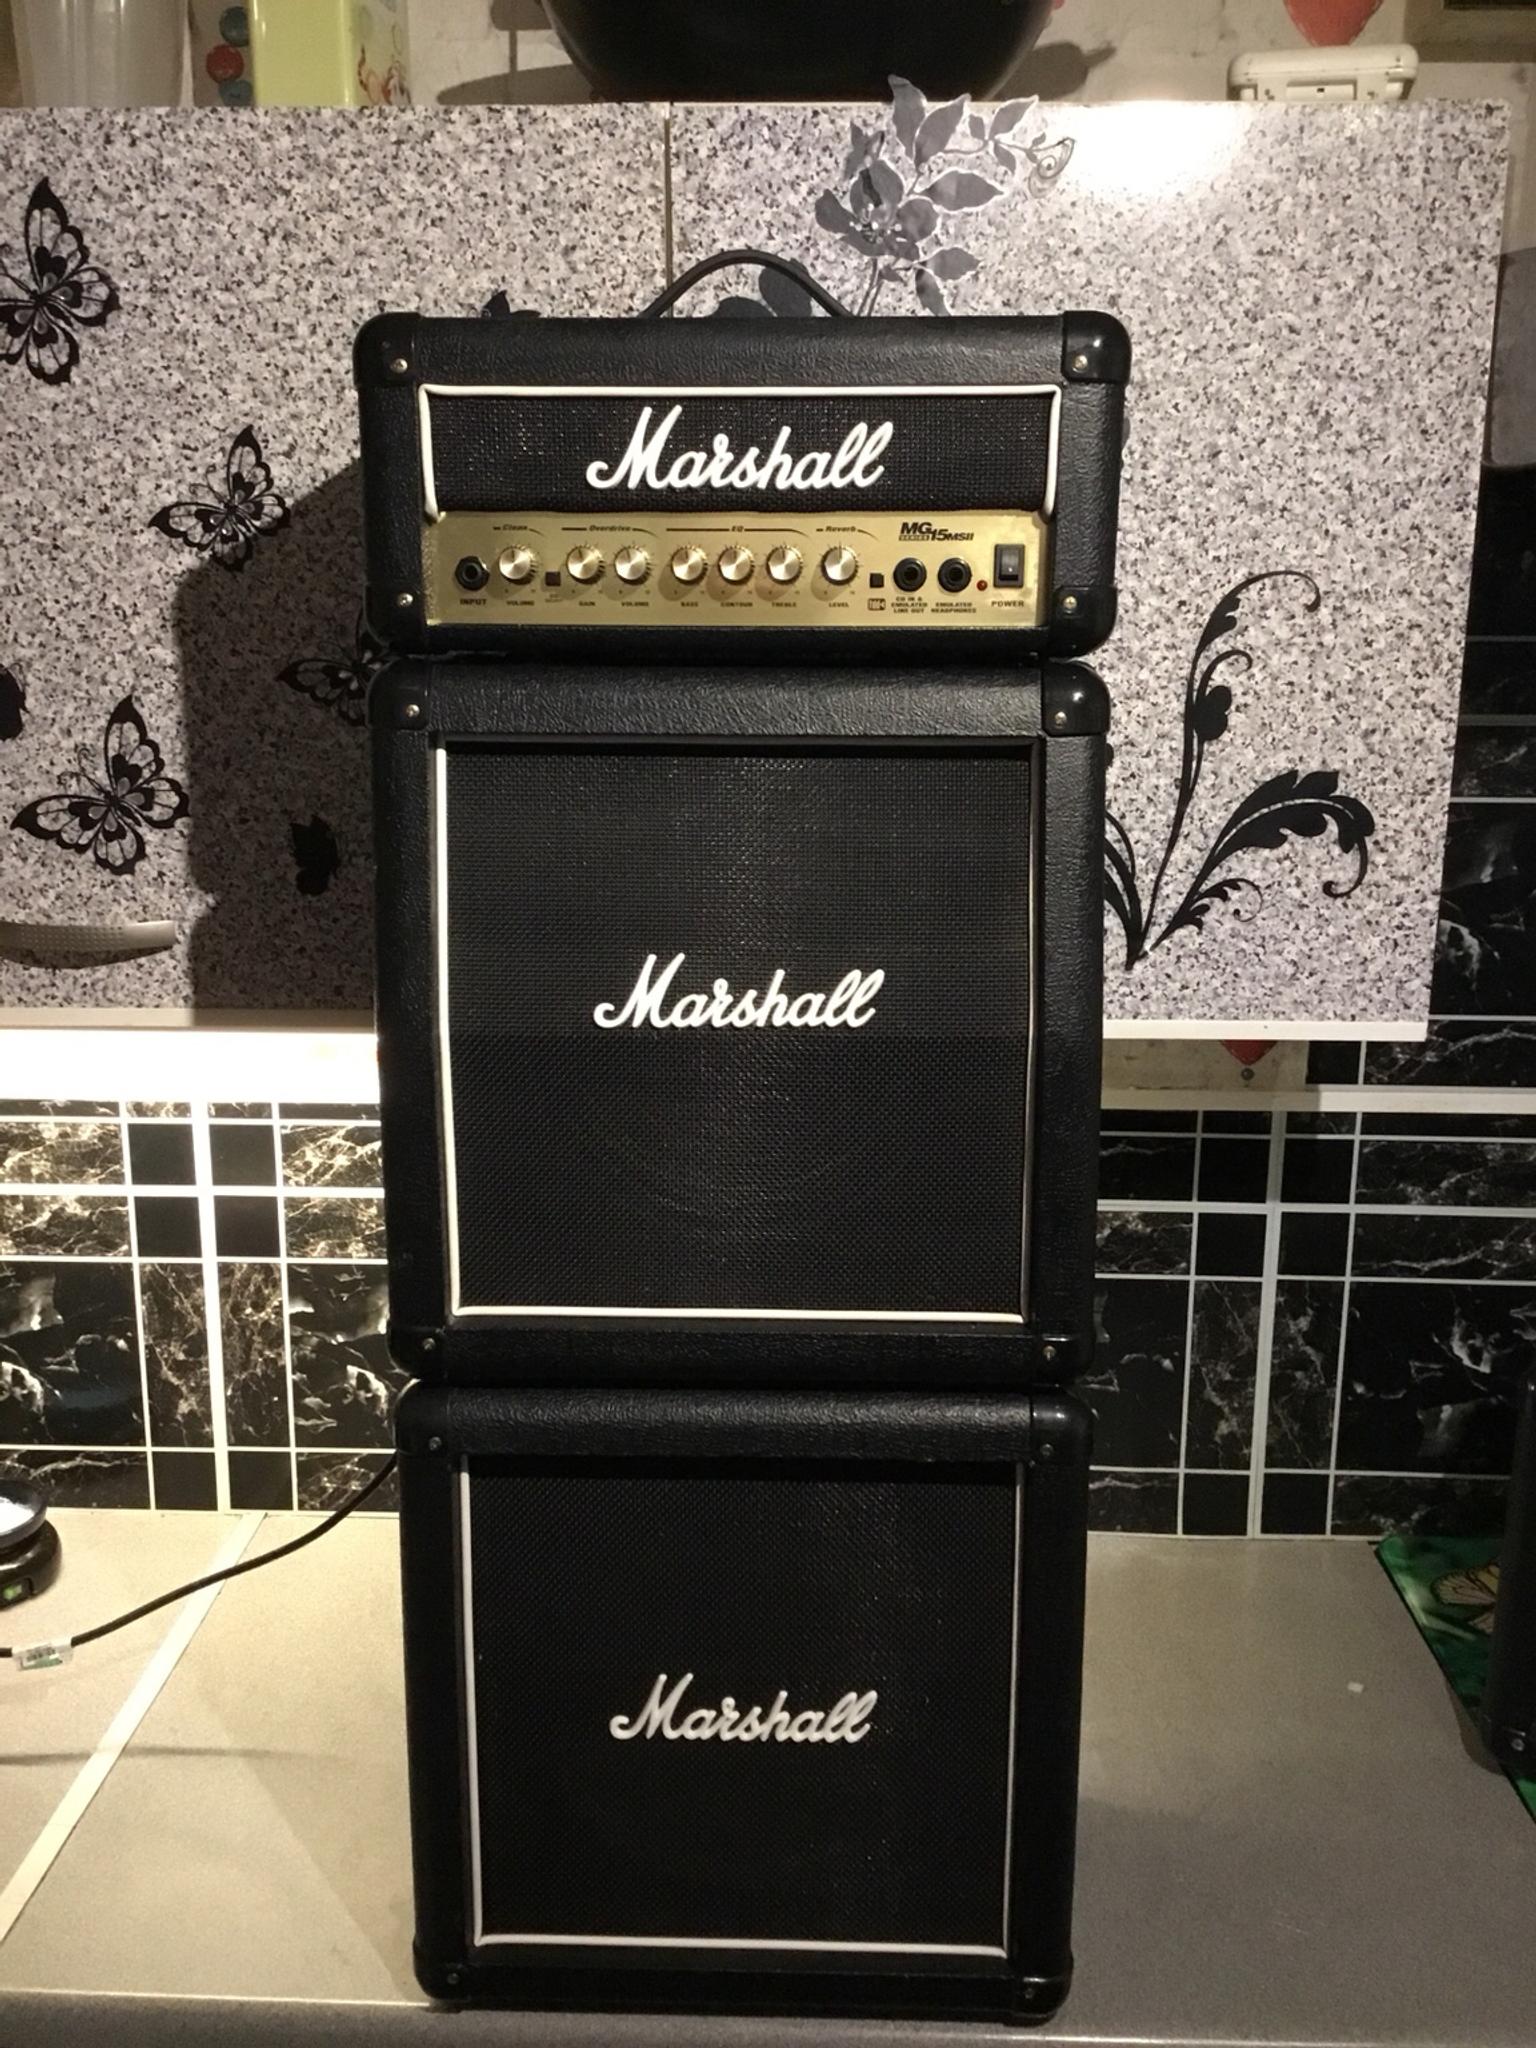 Marshall Mg15ms11 Mini Stack Guitar Amp In Le65 Leicestershire Fur